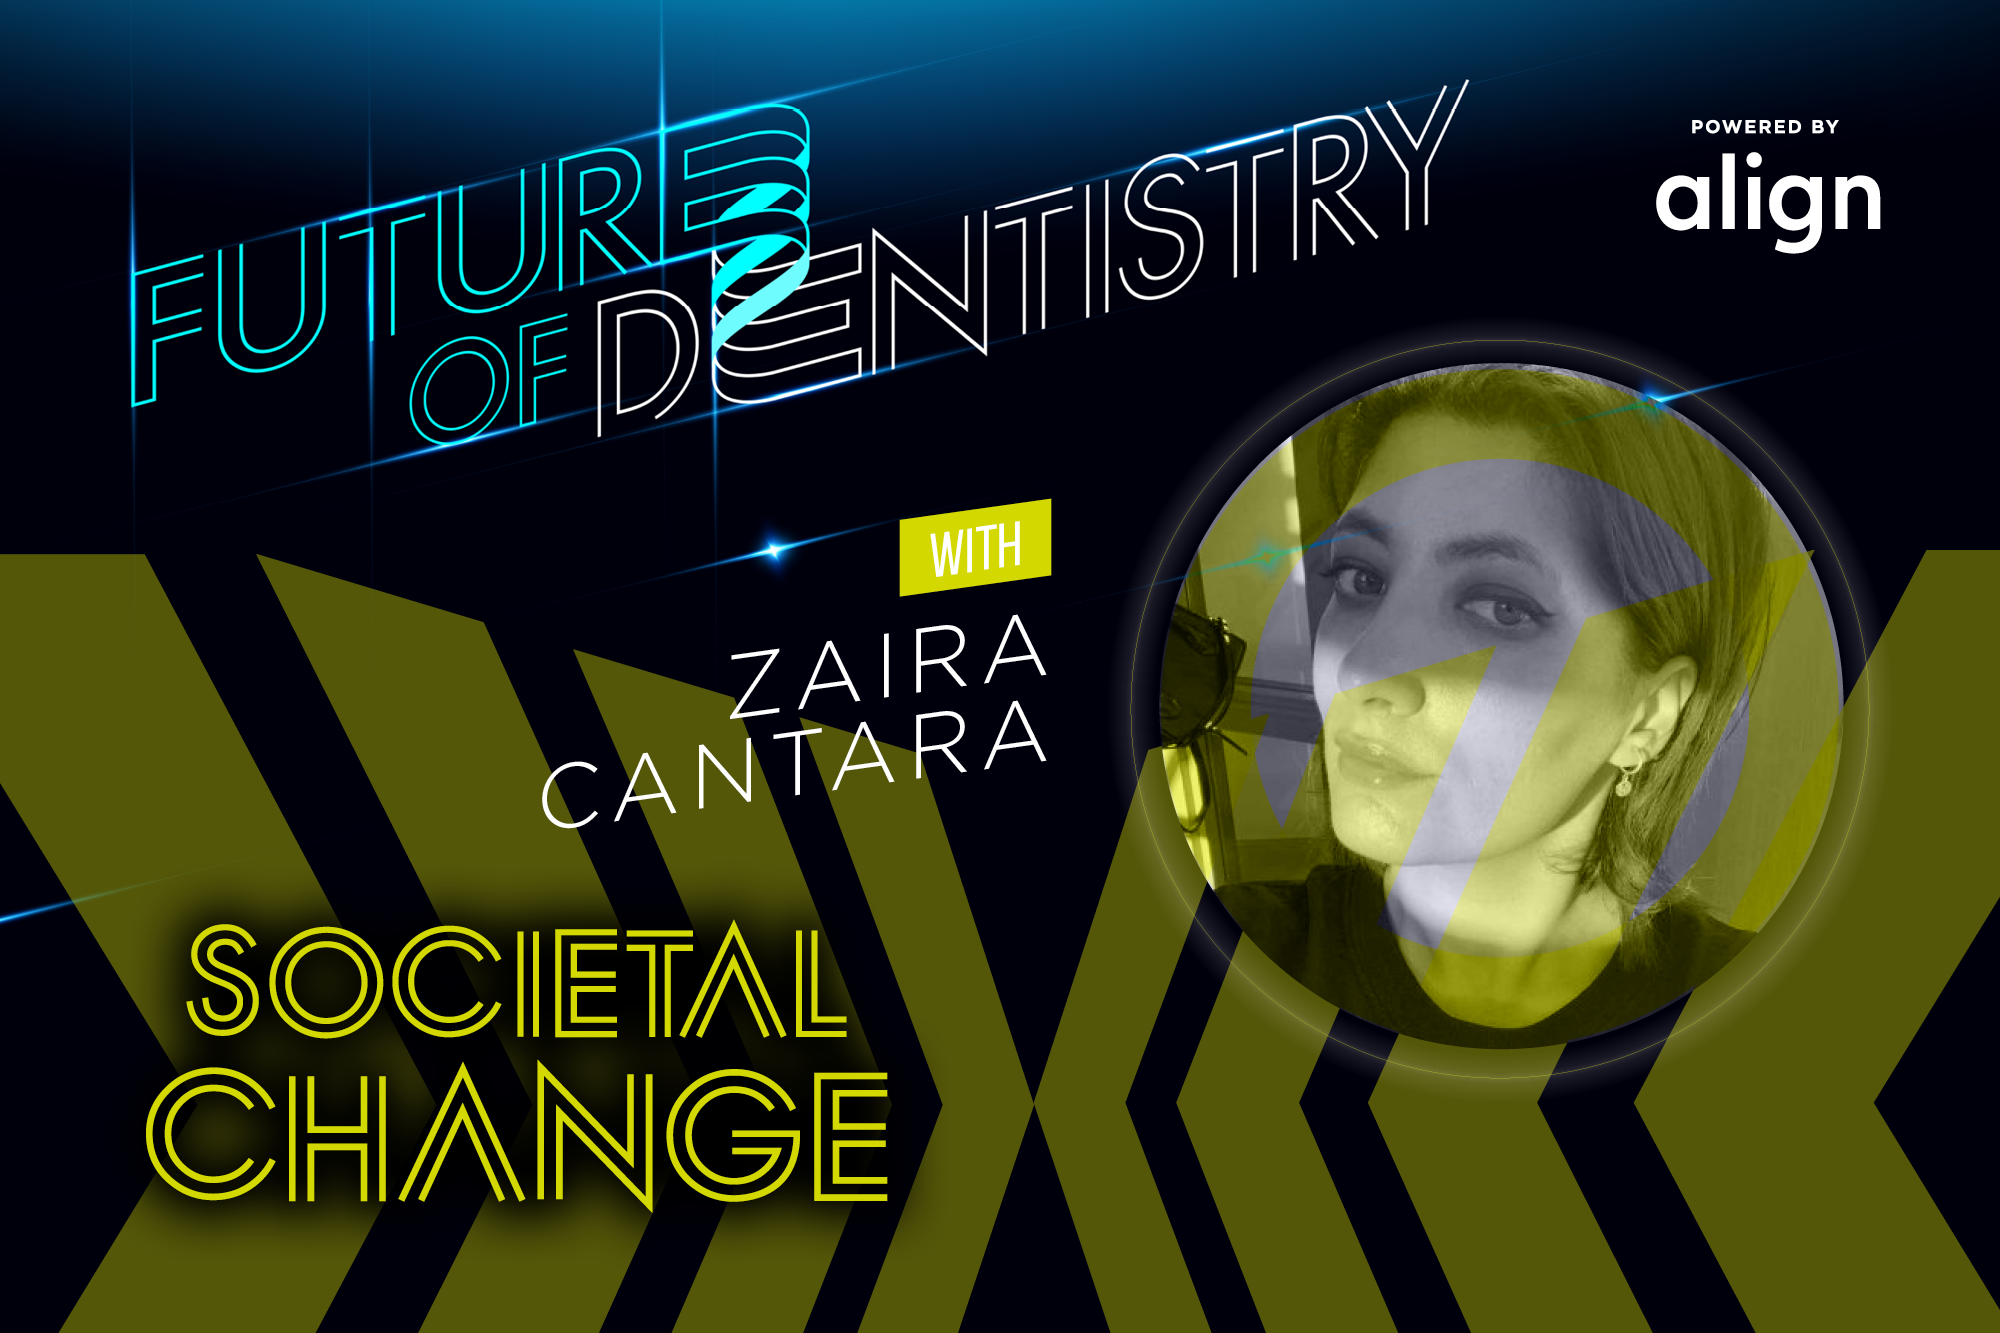 Zaira Cantara discusses how the NHS access crisis is affecting her education, and what the general sentiment is about NHS dentistry amongst dental students.